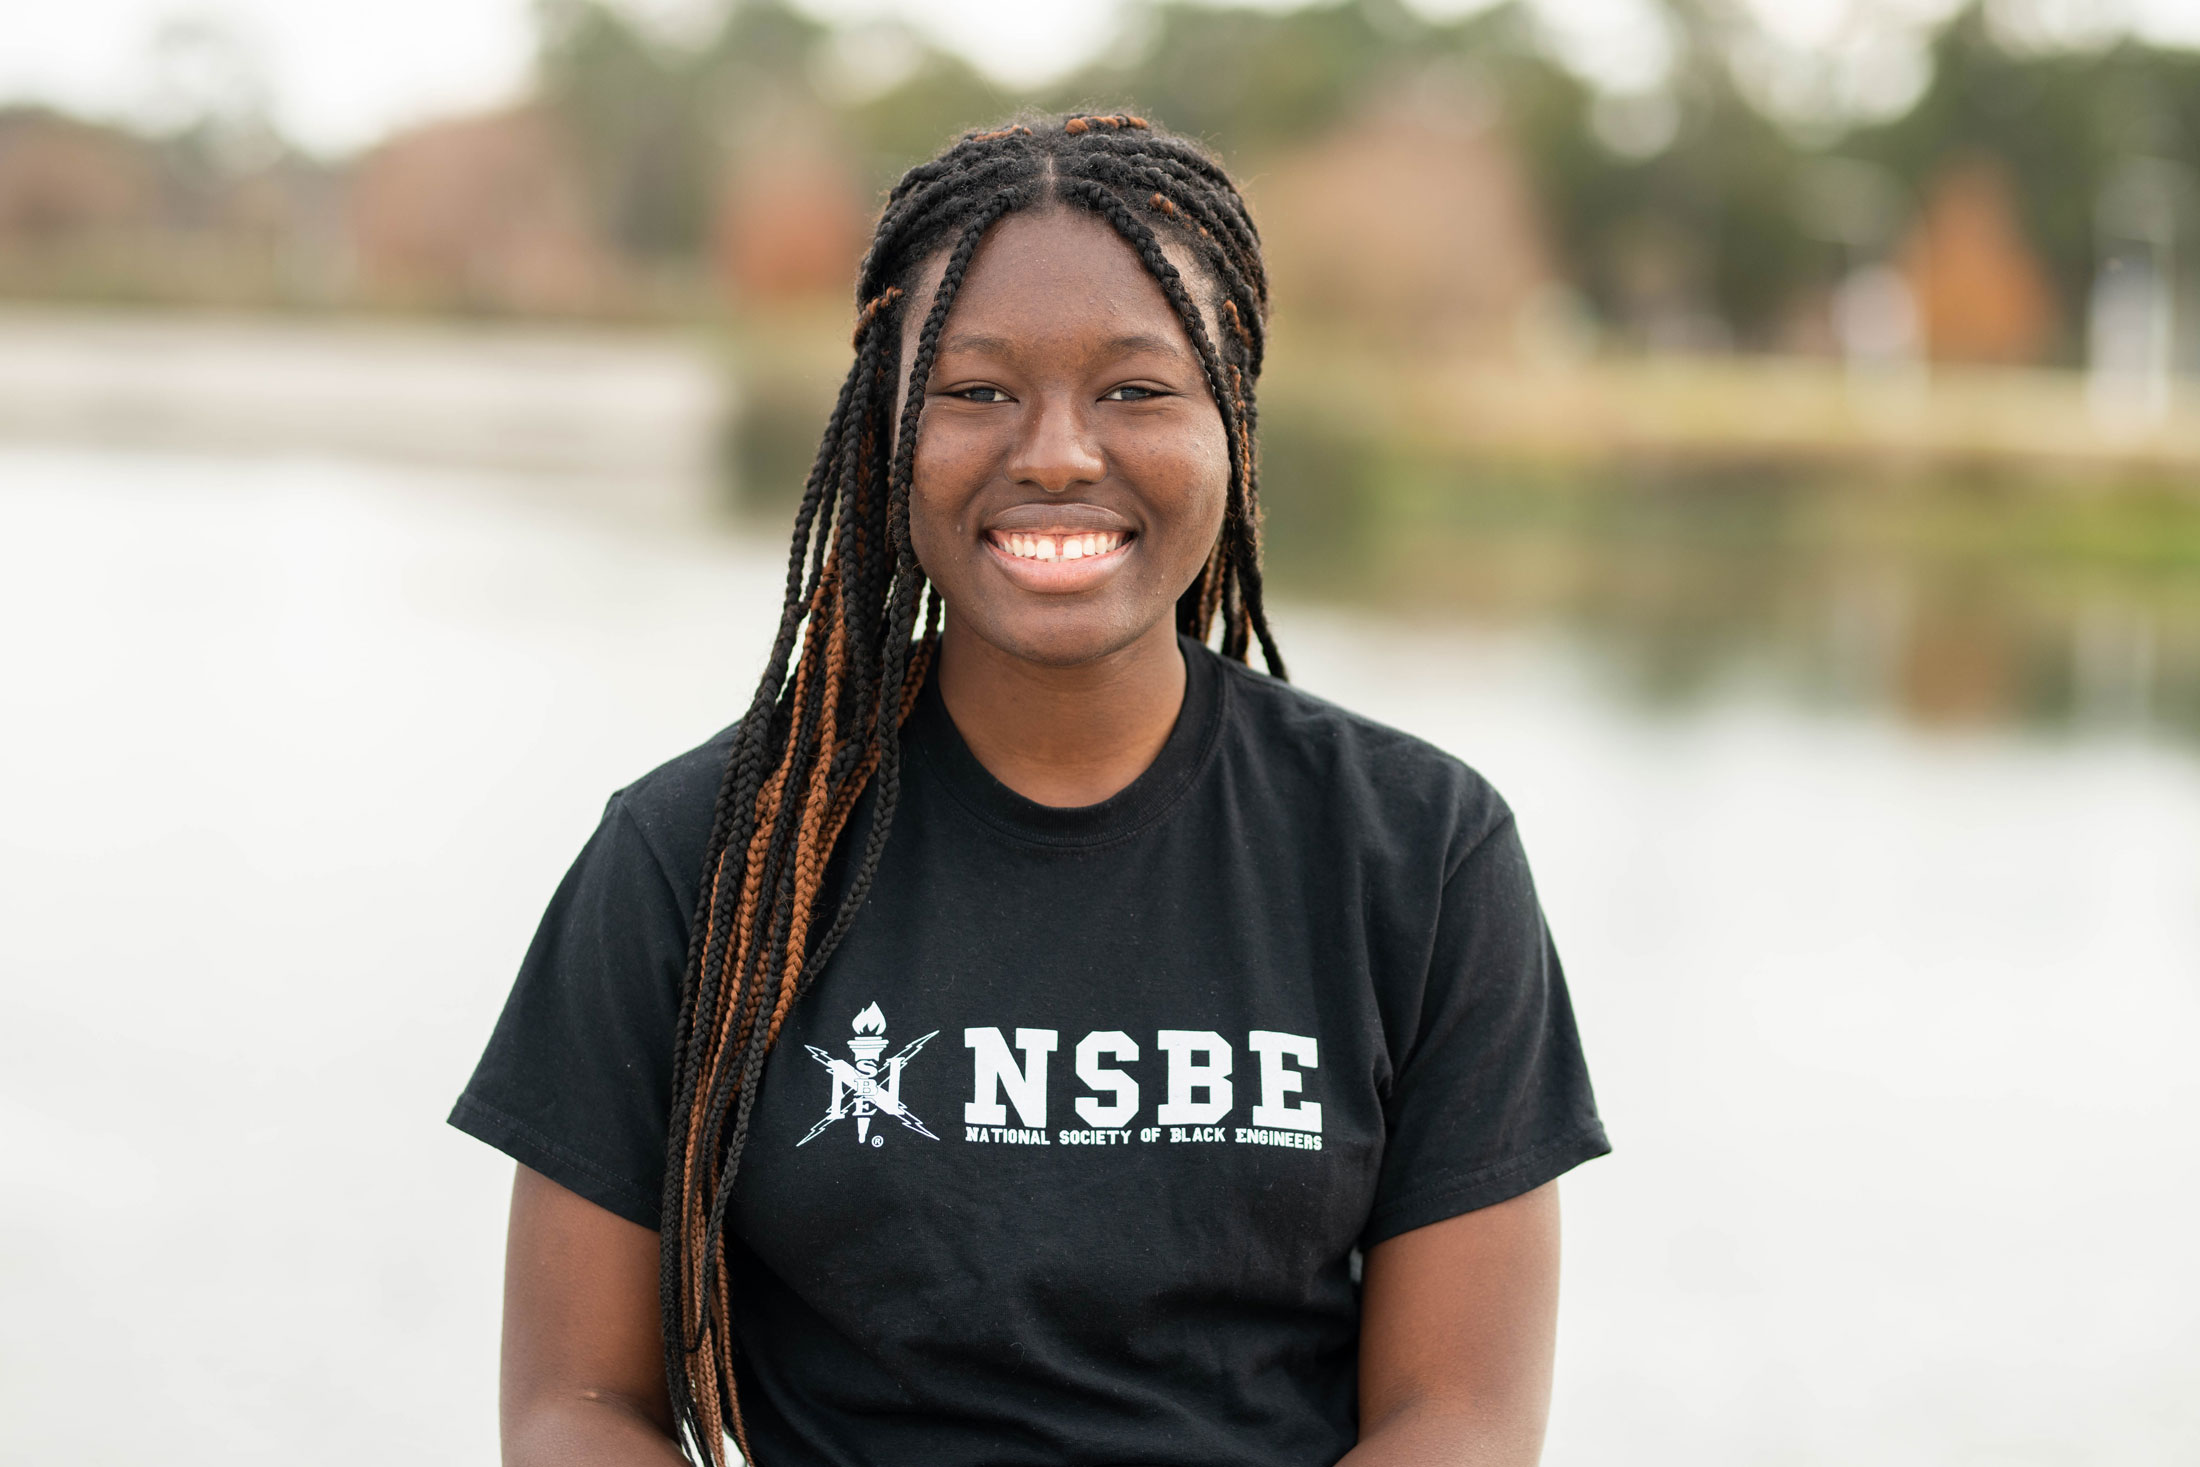 Catherine Abraham is president of the National Society of Black Engineers at Florida Polytechnic University.